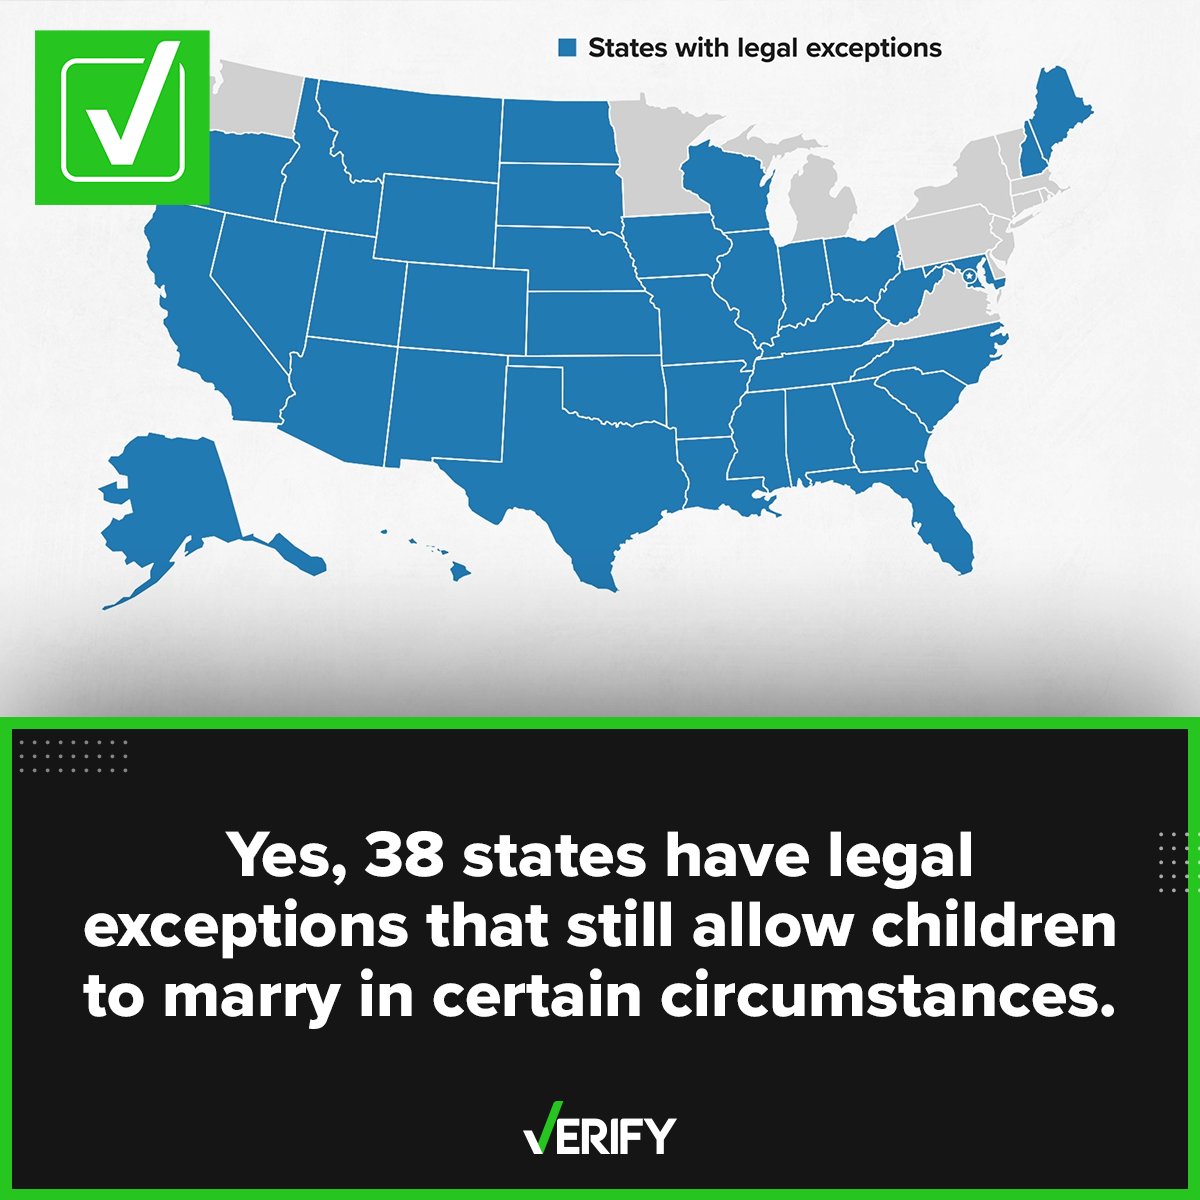 Viral social media posts that claim child marriage is legal in 38 states are actually true, but most of those states only allow it in limited circumstances: verifythis.com/article/news/v…